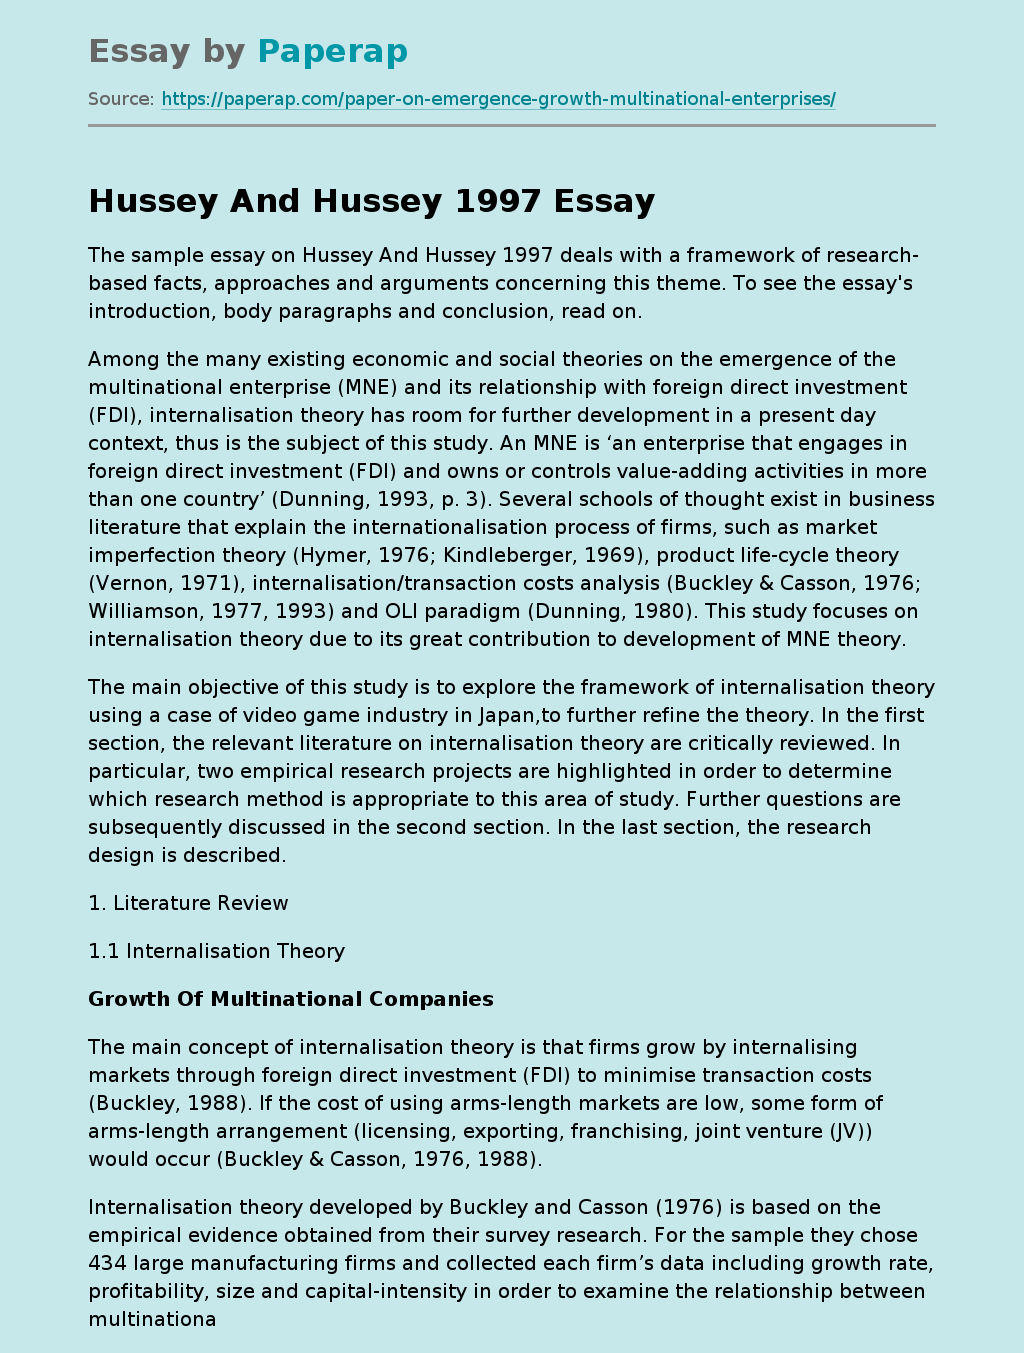 Hussey And Hussey 1997